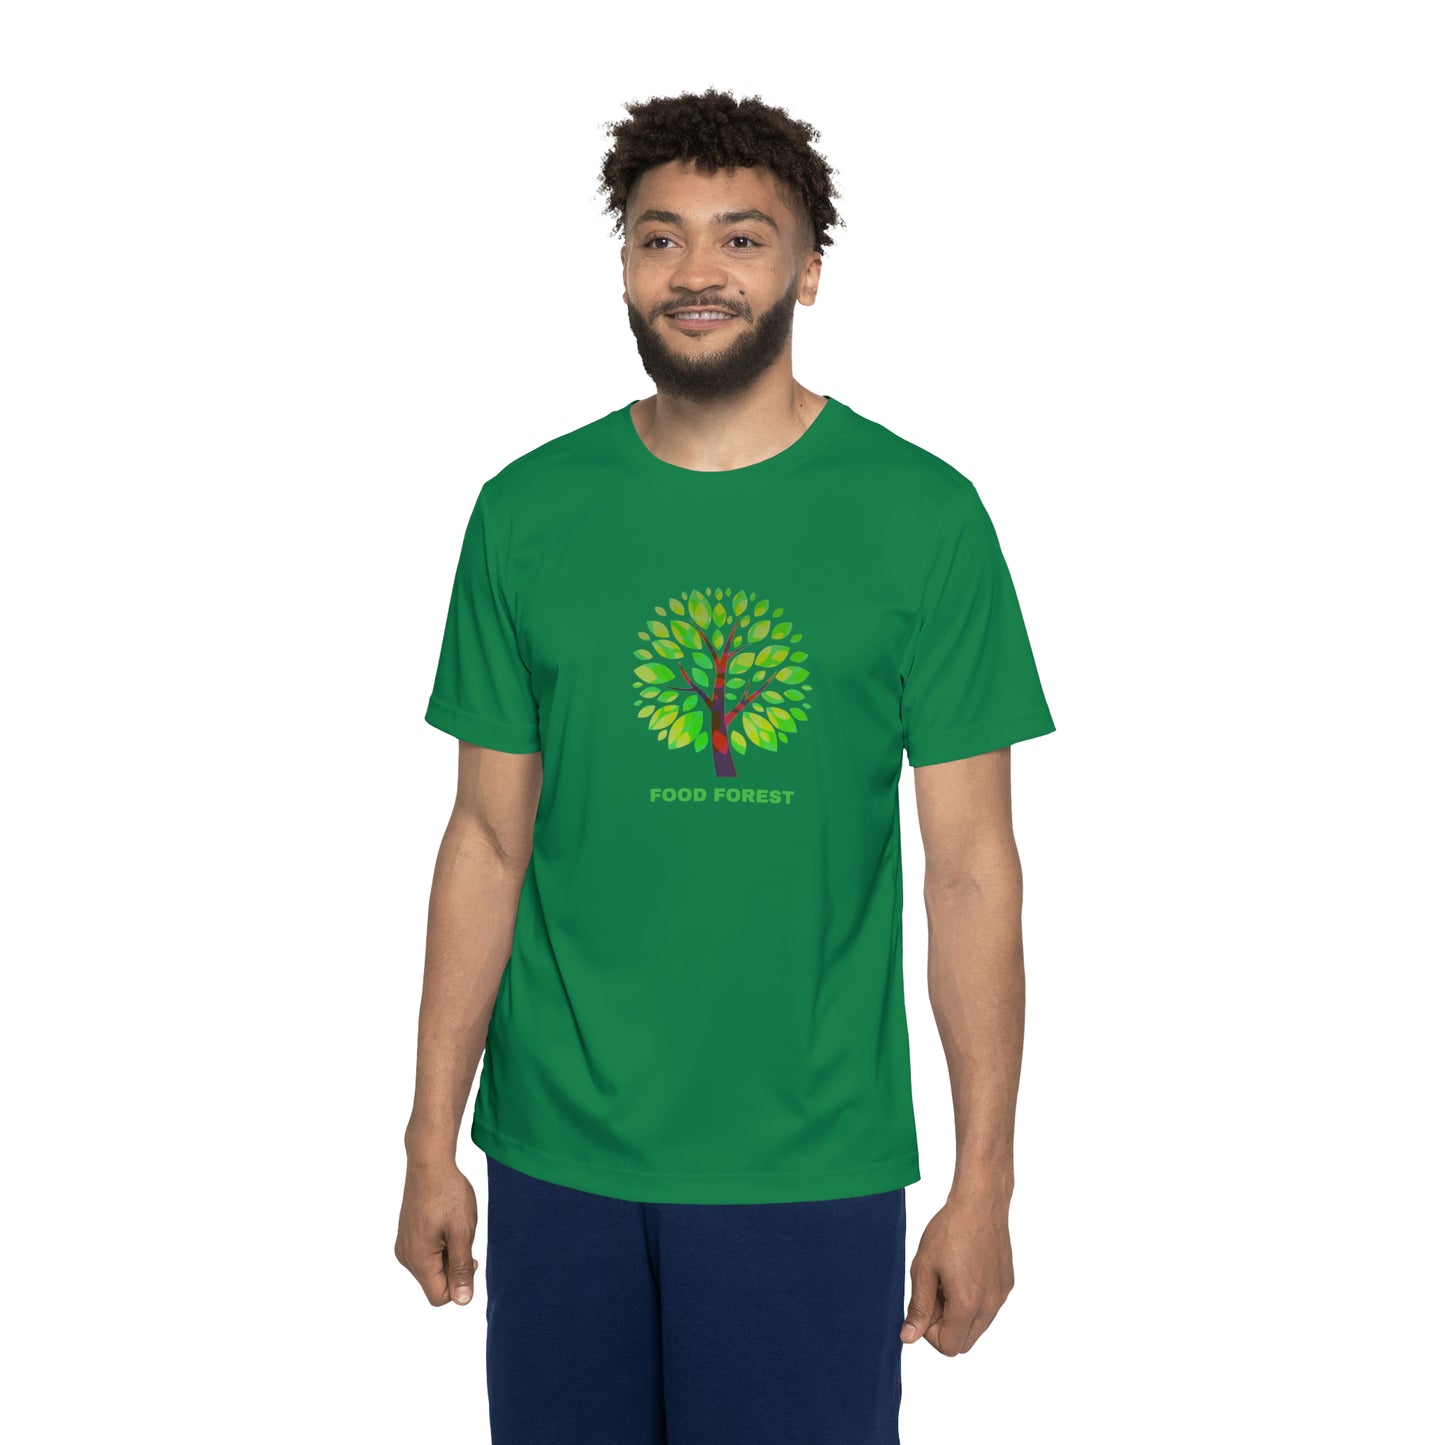 FOOD FOREST Men's Sports Jersey, Green